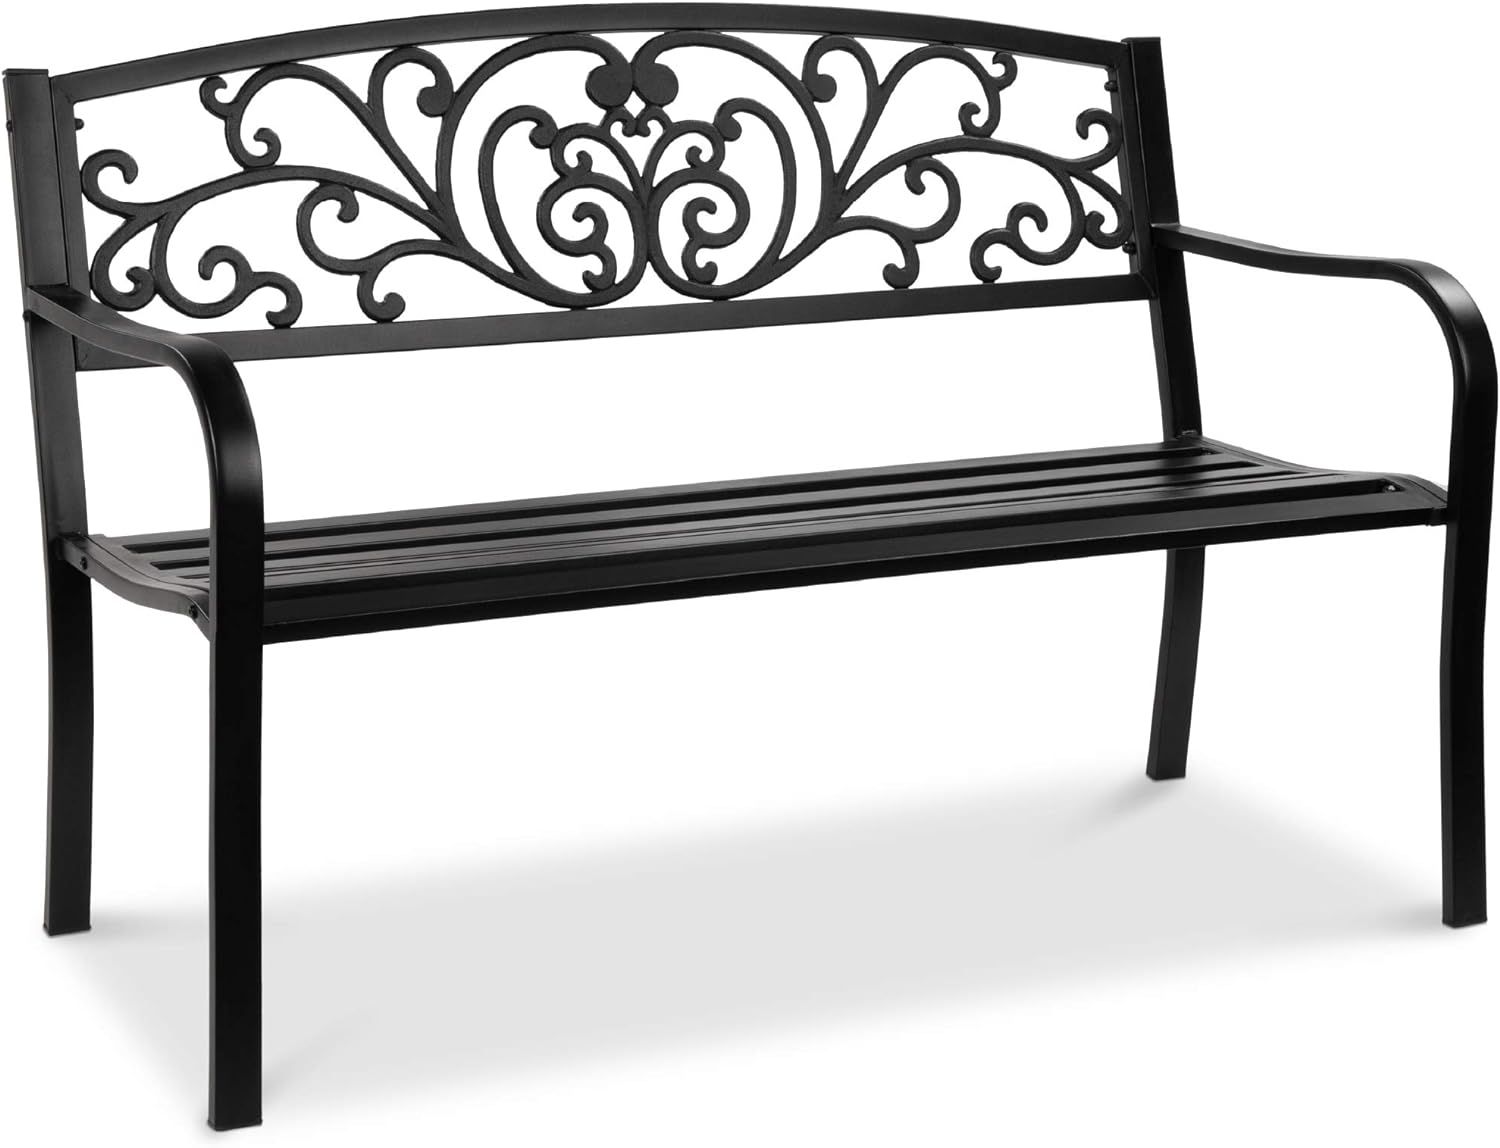 Best Choice Products Outdoor Bench Steel Garden Patio Porch Furniture for Lawn, Park, Deck w/Floral  | Amazon (US)